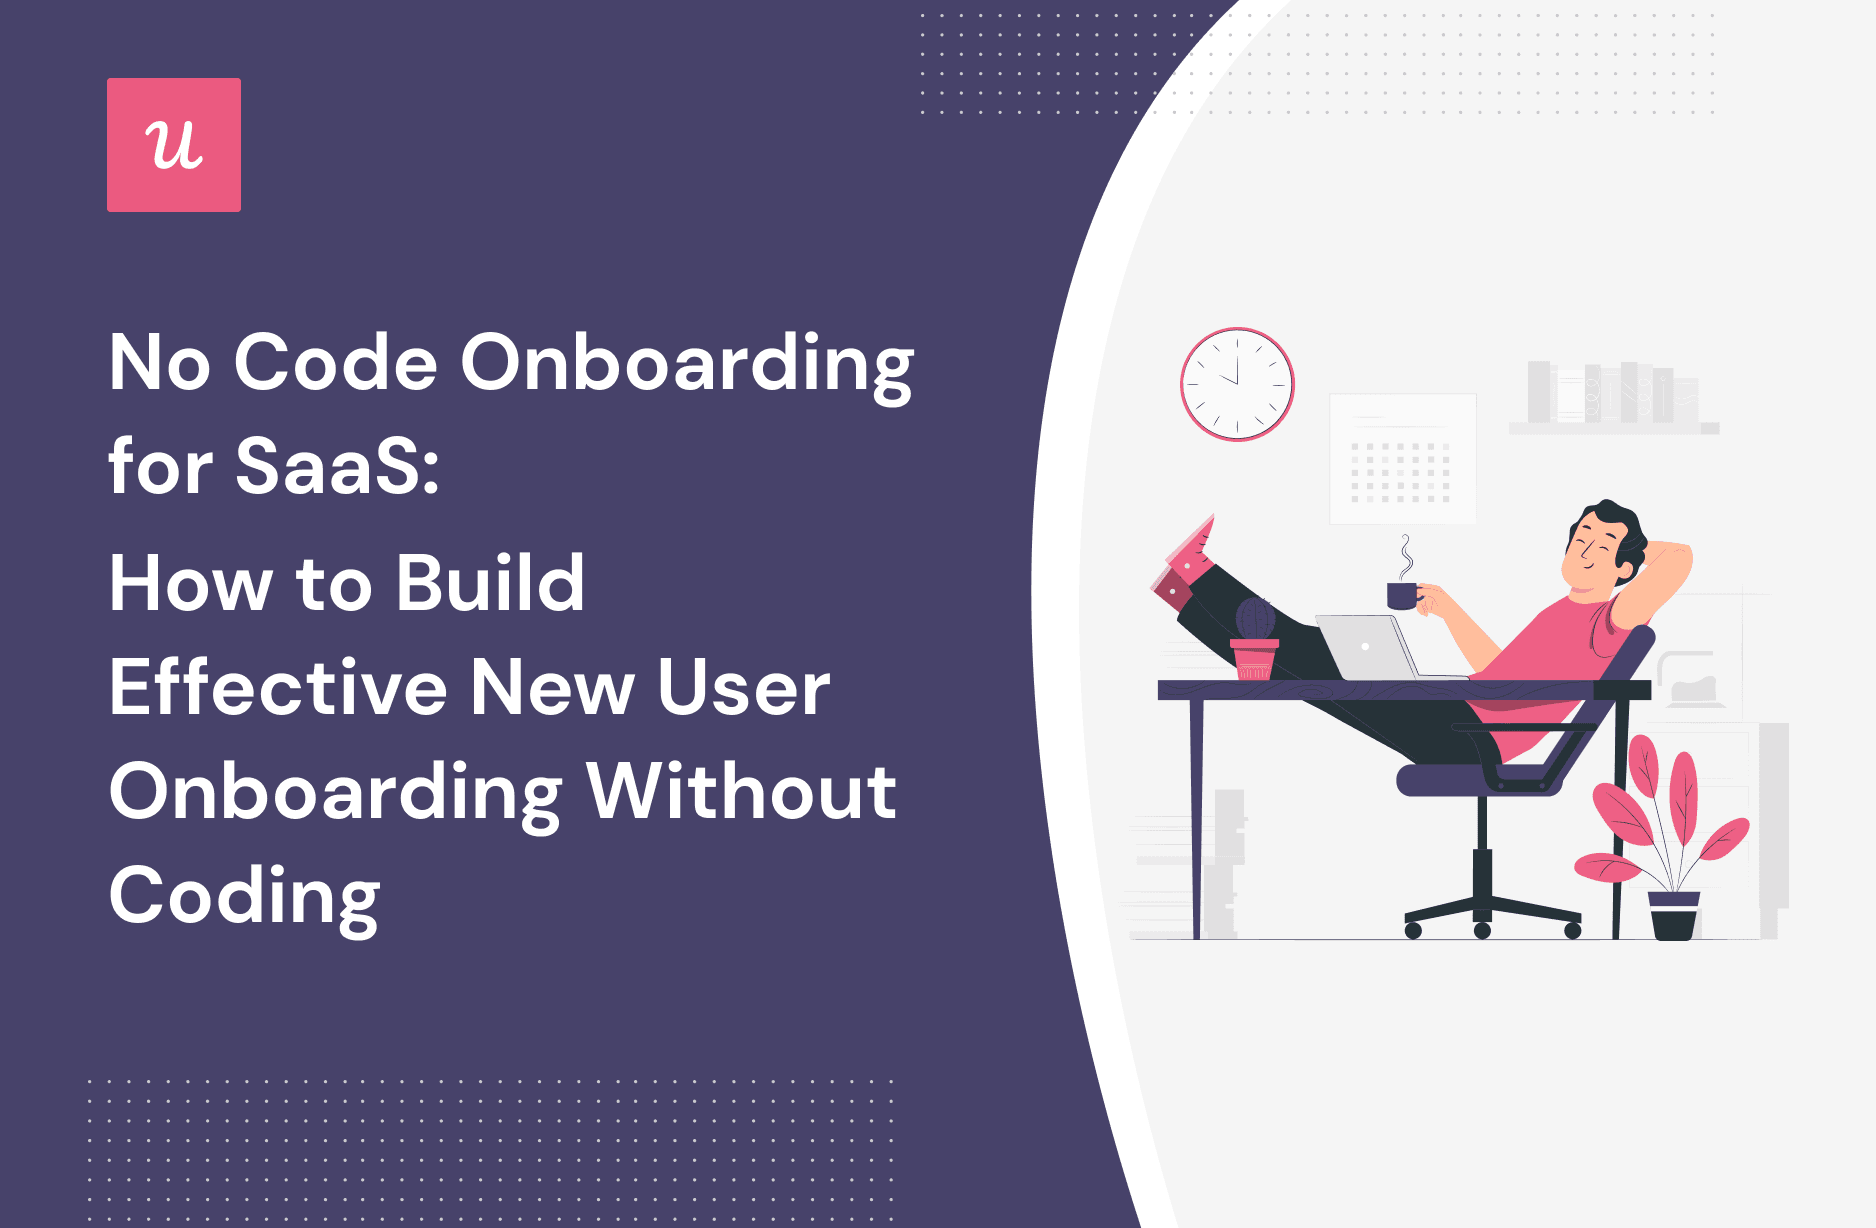 No Code Onboarding for SaaS: How to Build Effective New User Onboarding Without Coding cover